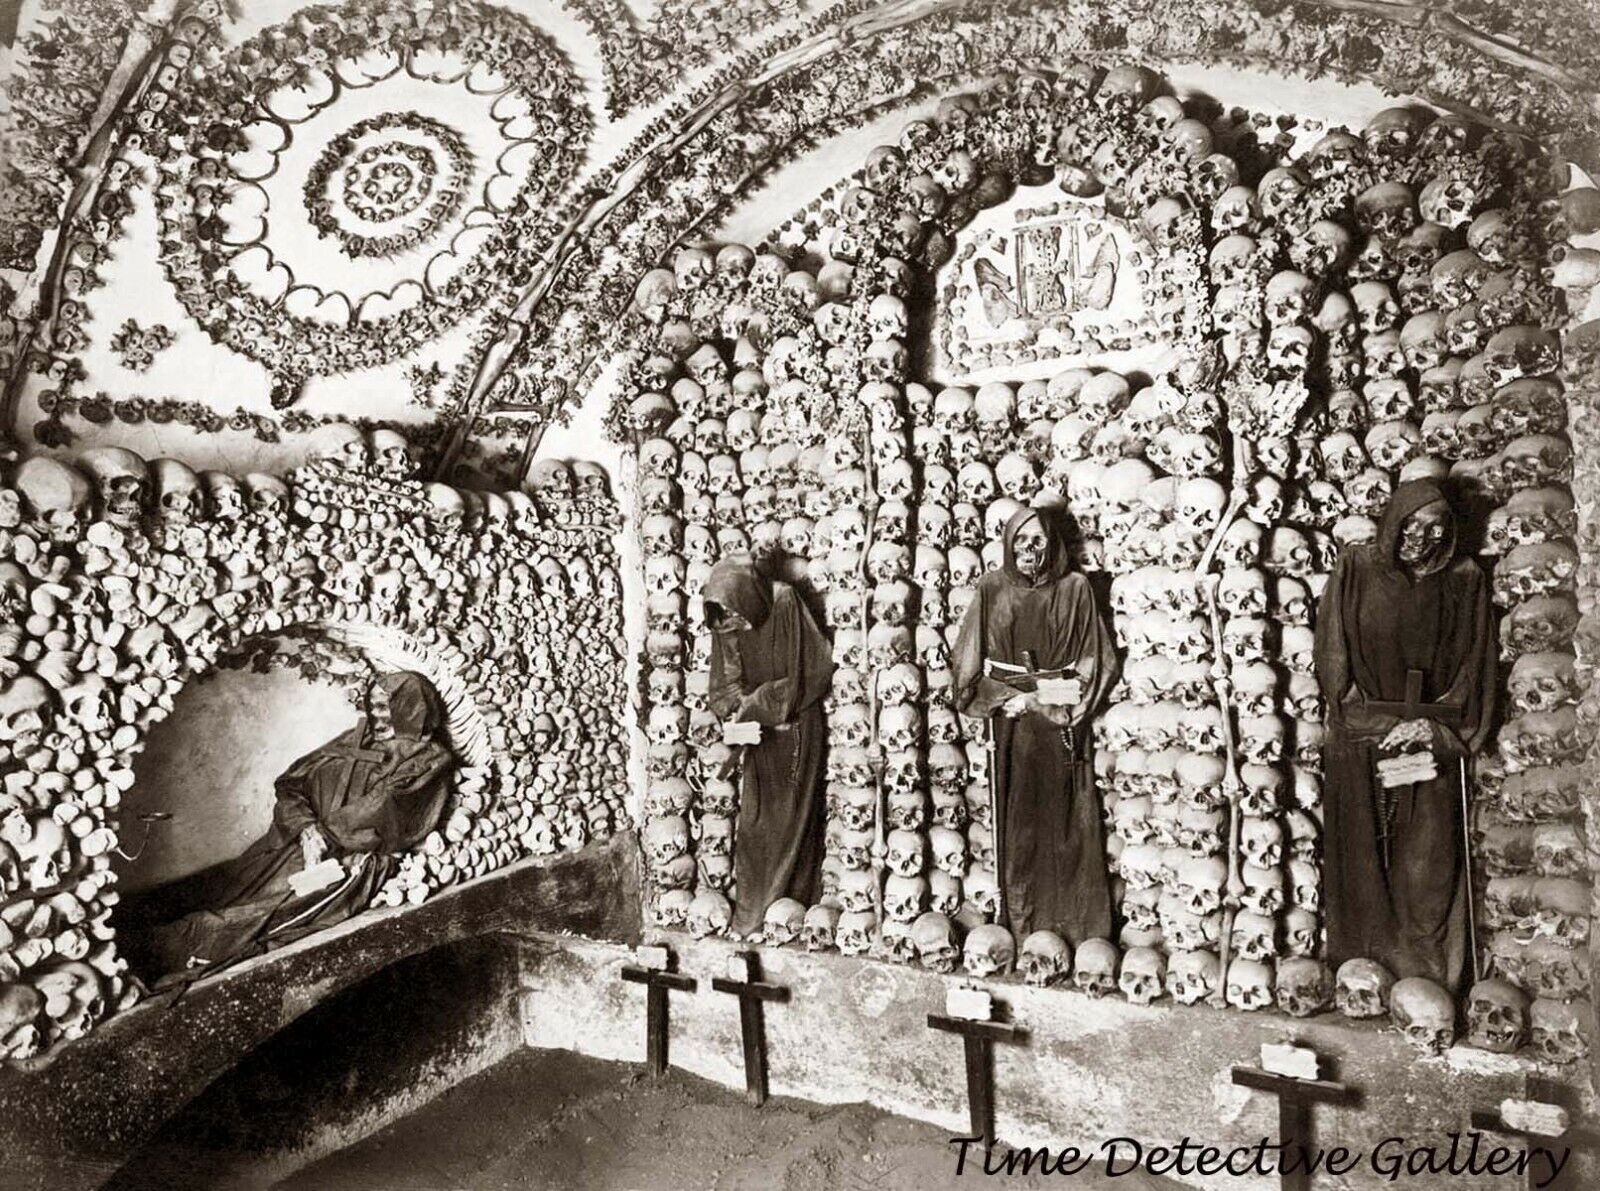 Skeletons in Capuchin Crypt, Rome, Italy - c1900 - Historic Photo Print